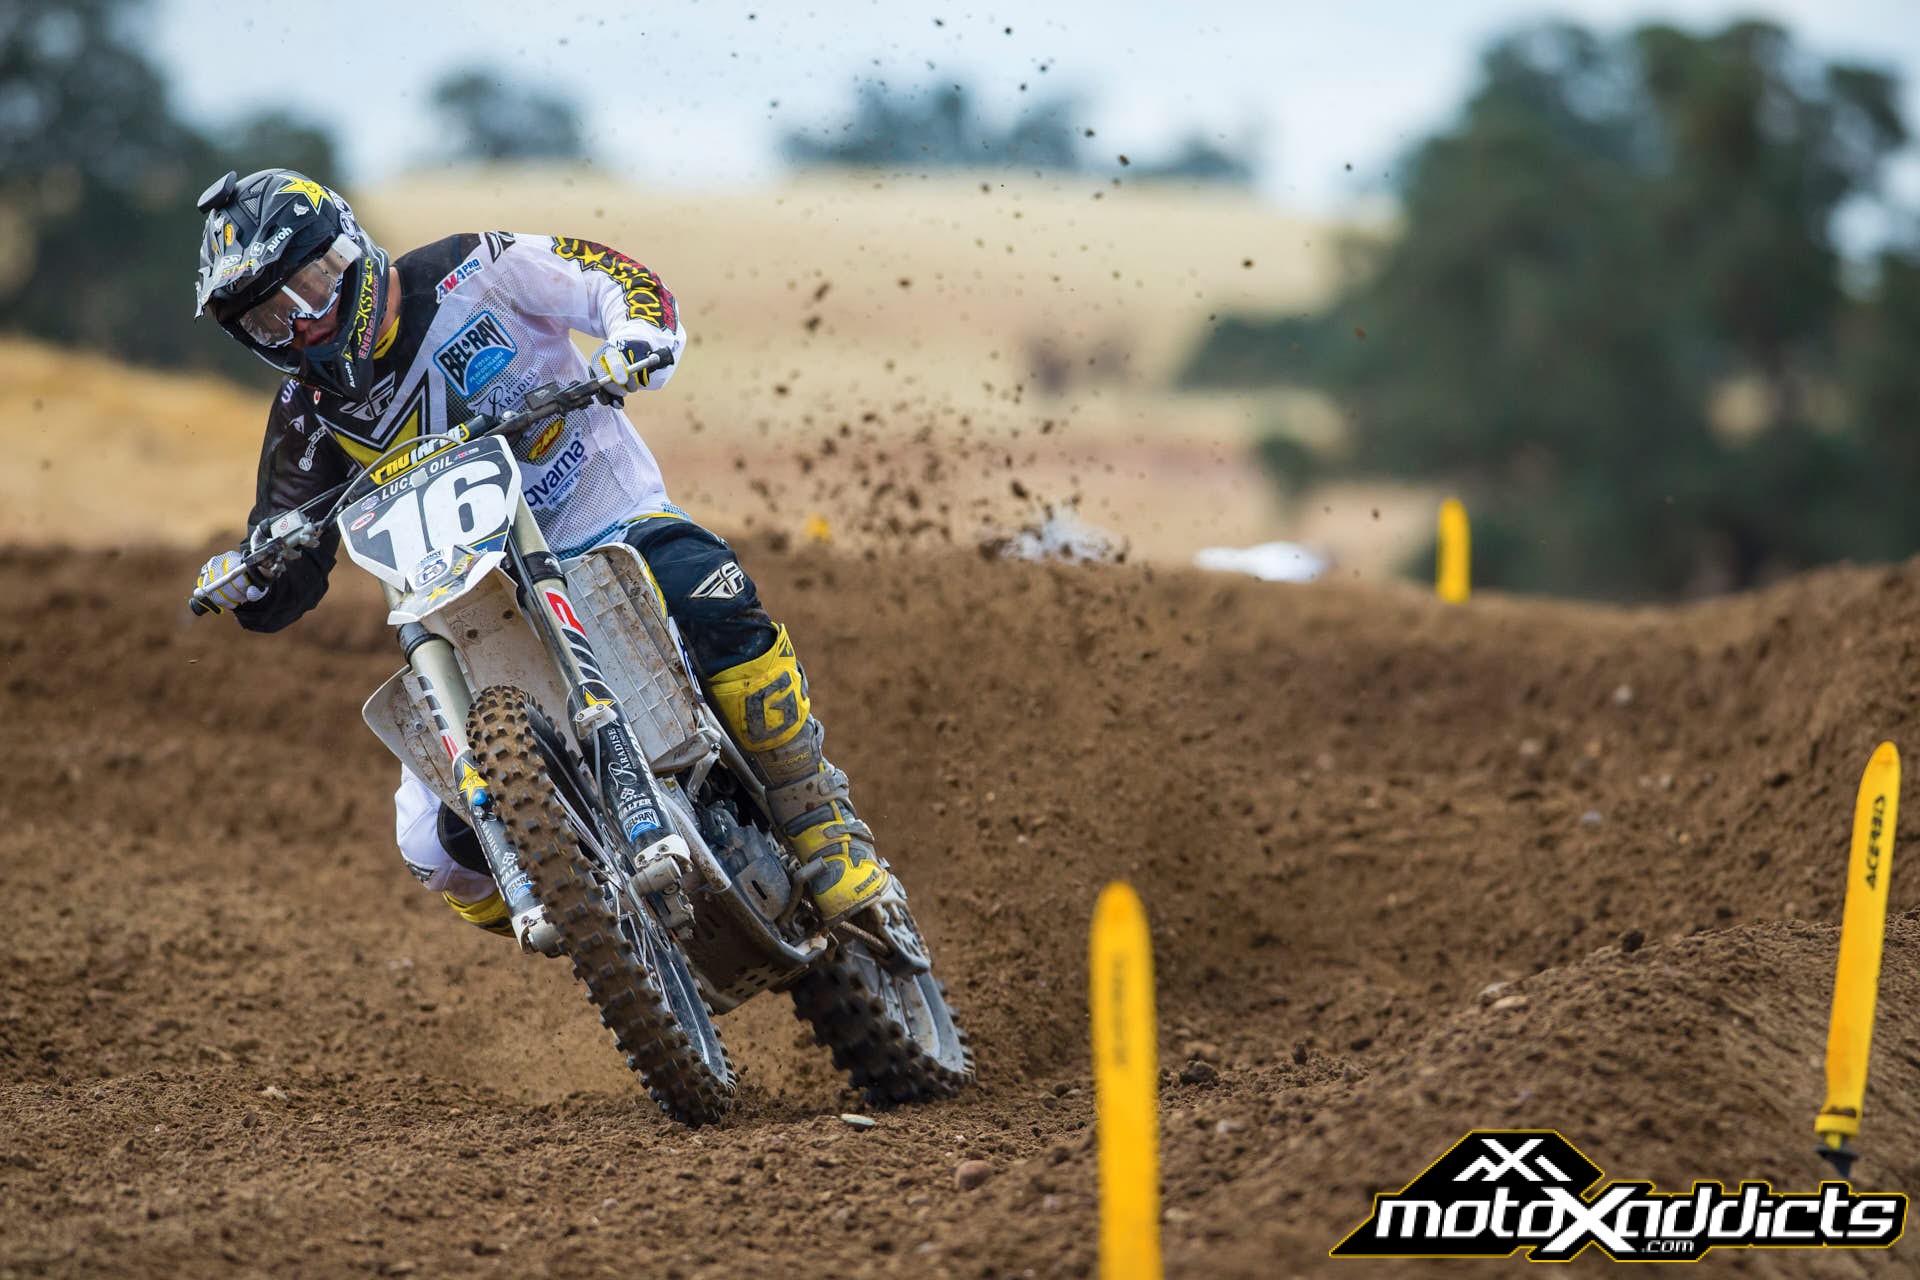 Zach Osborne had a tough opener, but in moto two he went from 20th to 4th with the fastest lap and average lap in the moto. Photo by: Hoppenworld